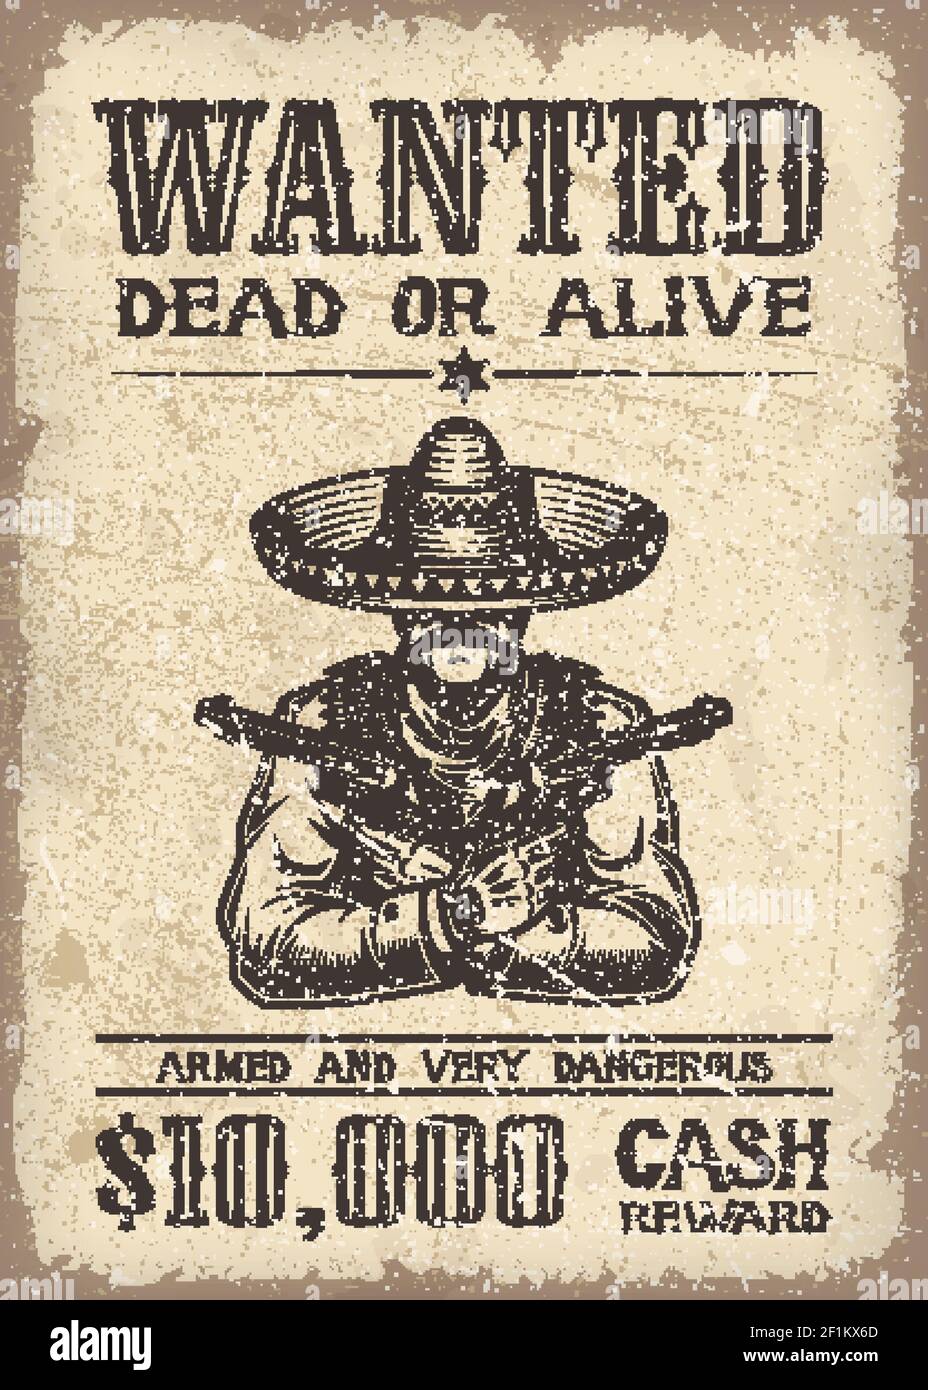 Vitage wild west wanted poster with old paper texture backgroung Stock Vector